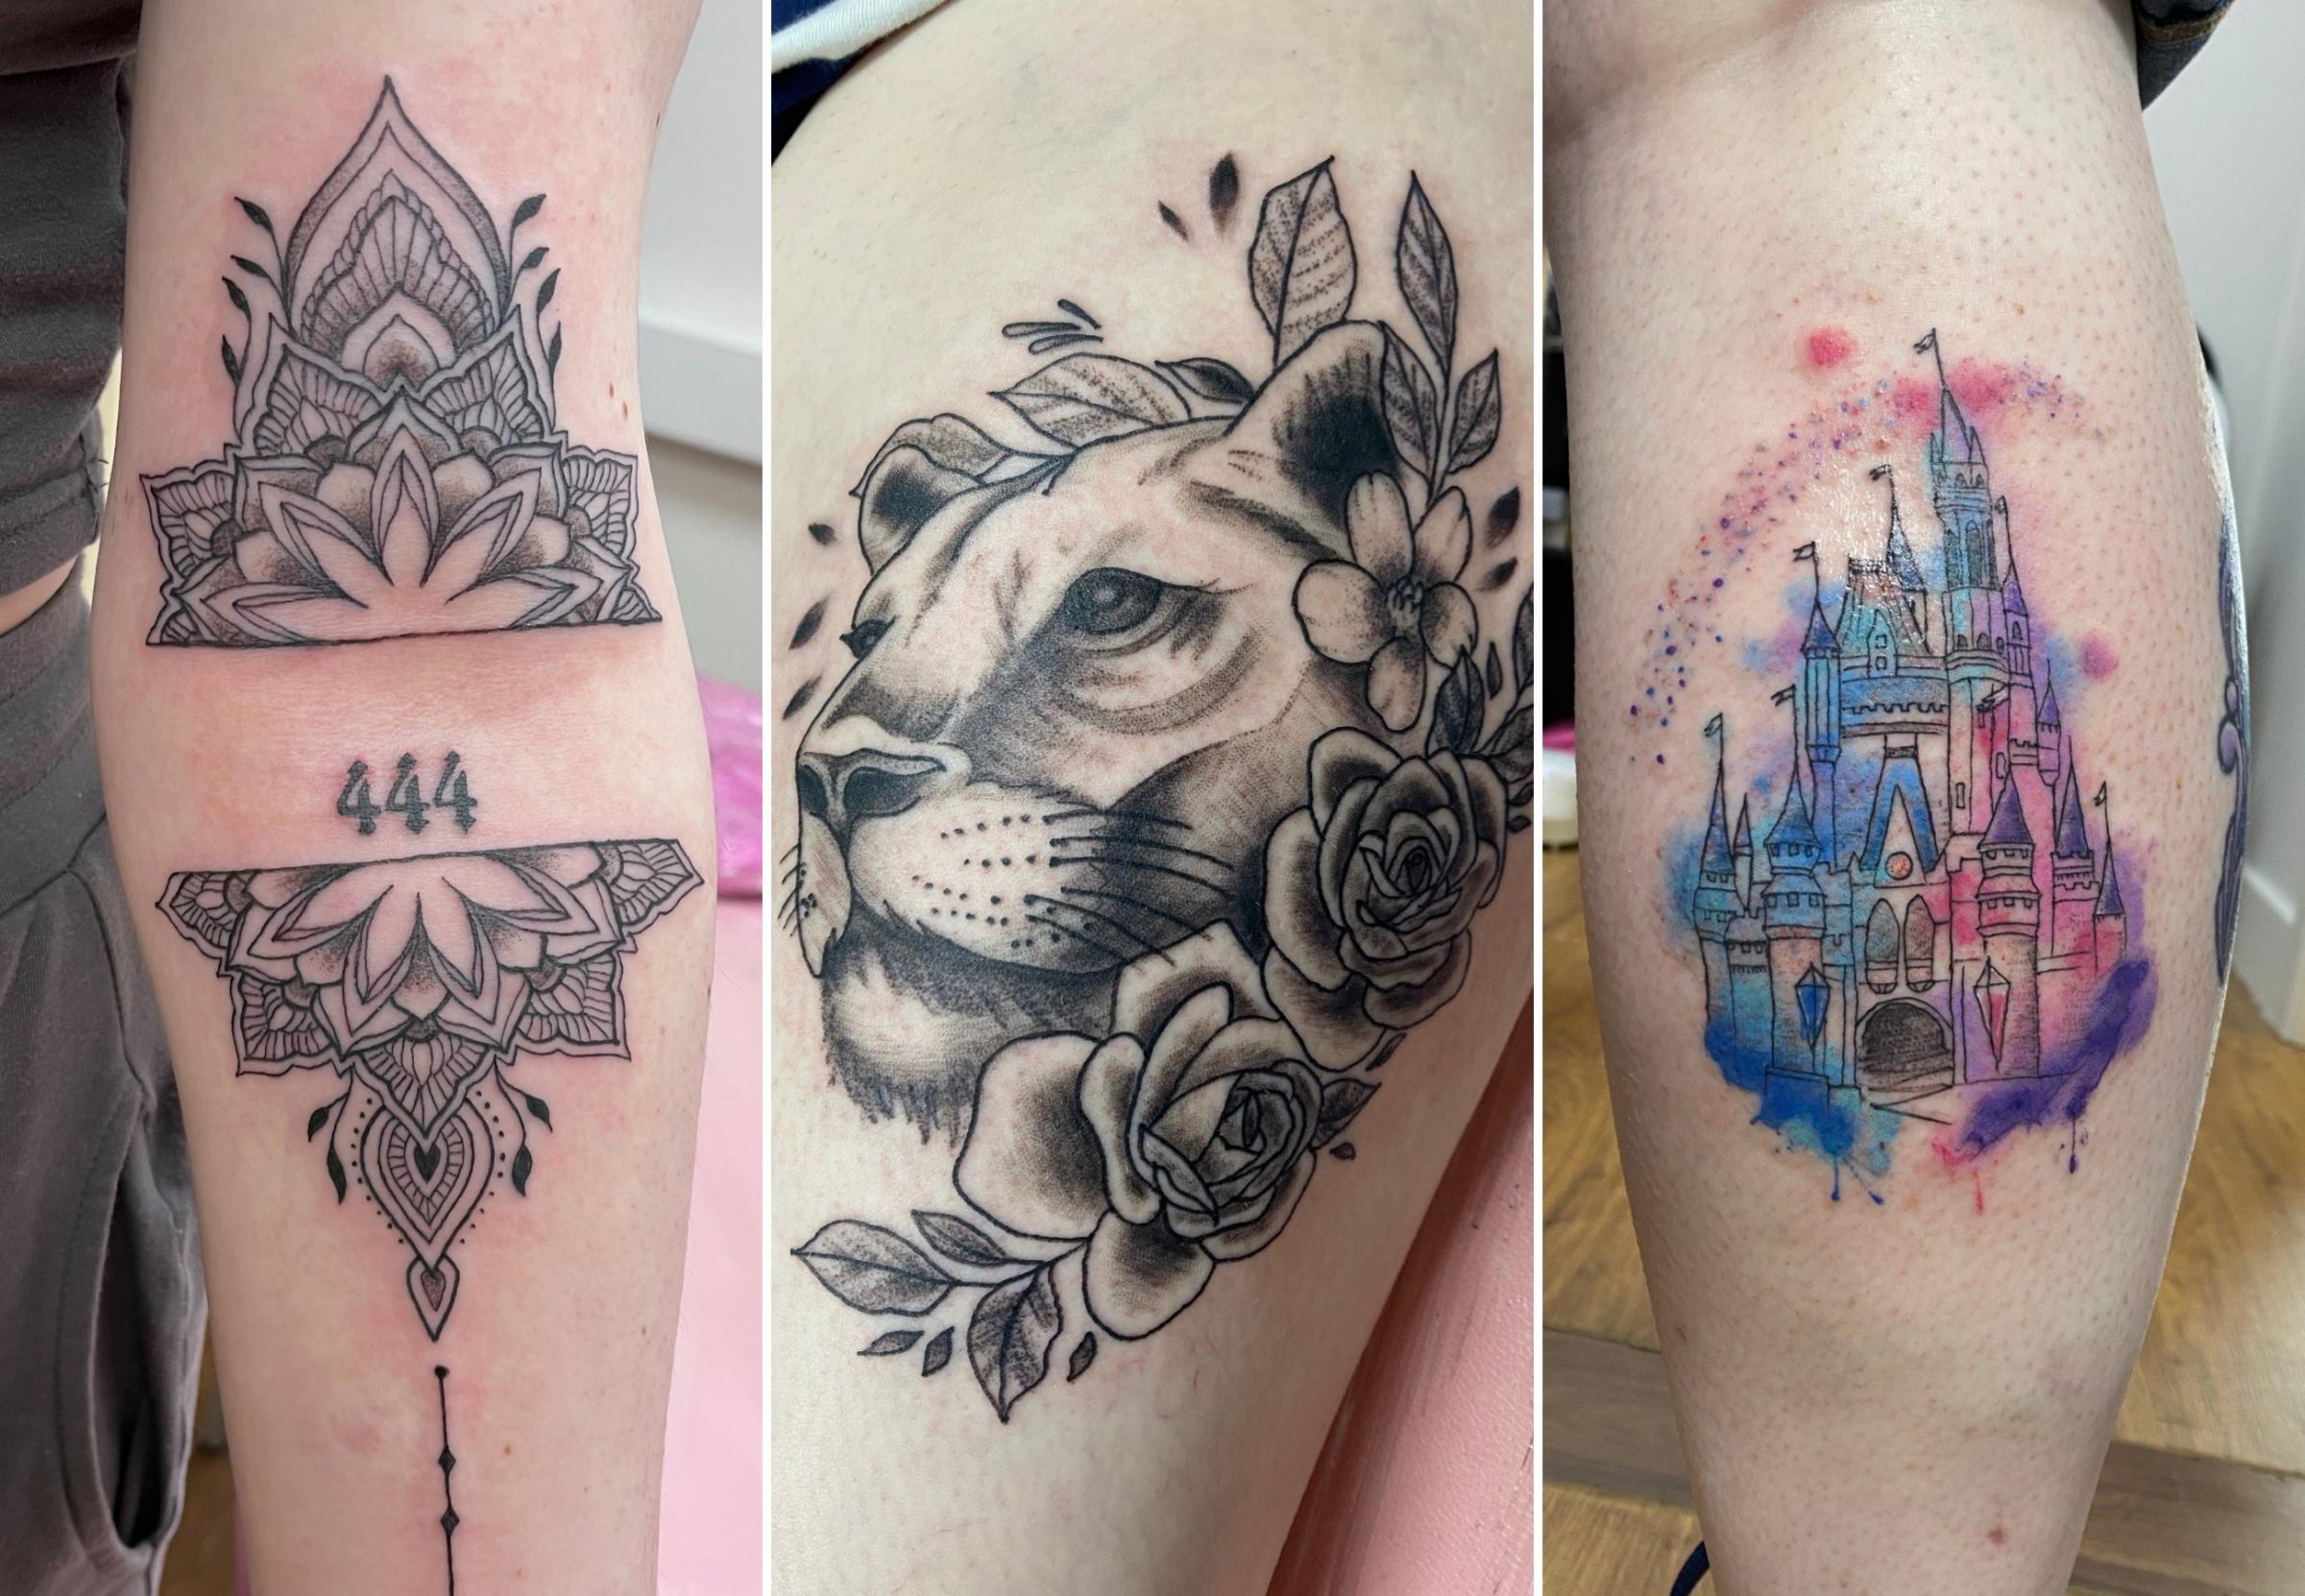 A few examples of Vickys inkwork